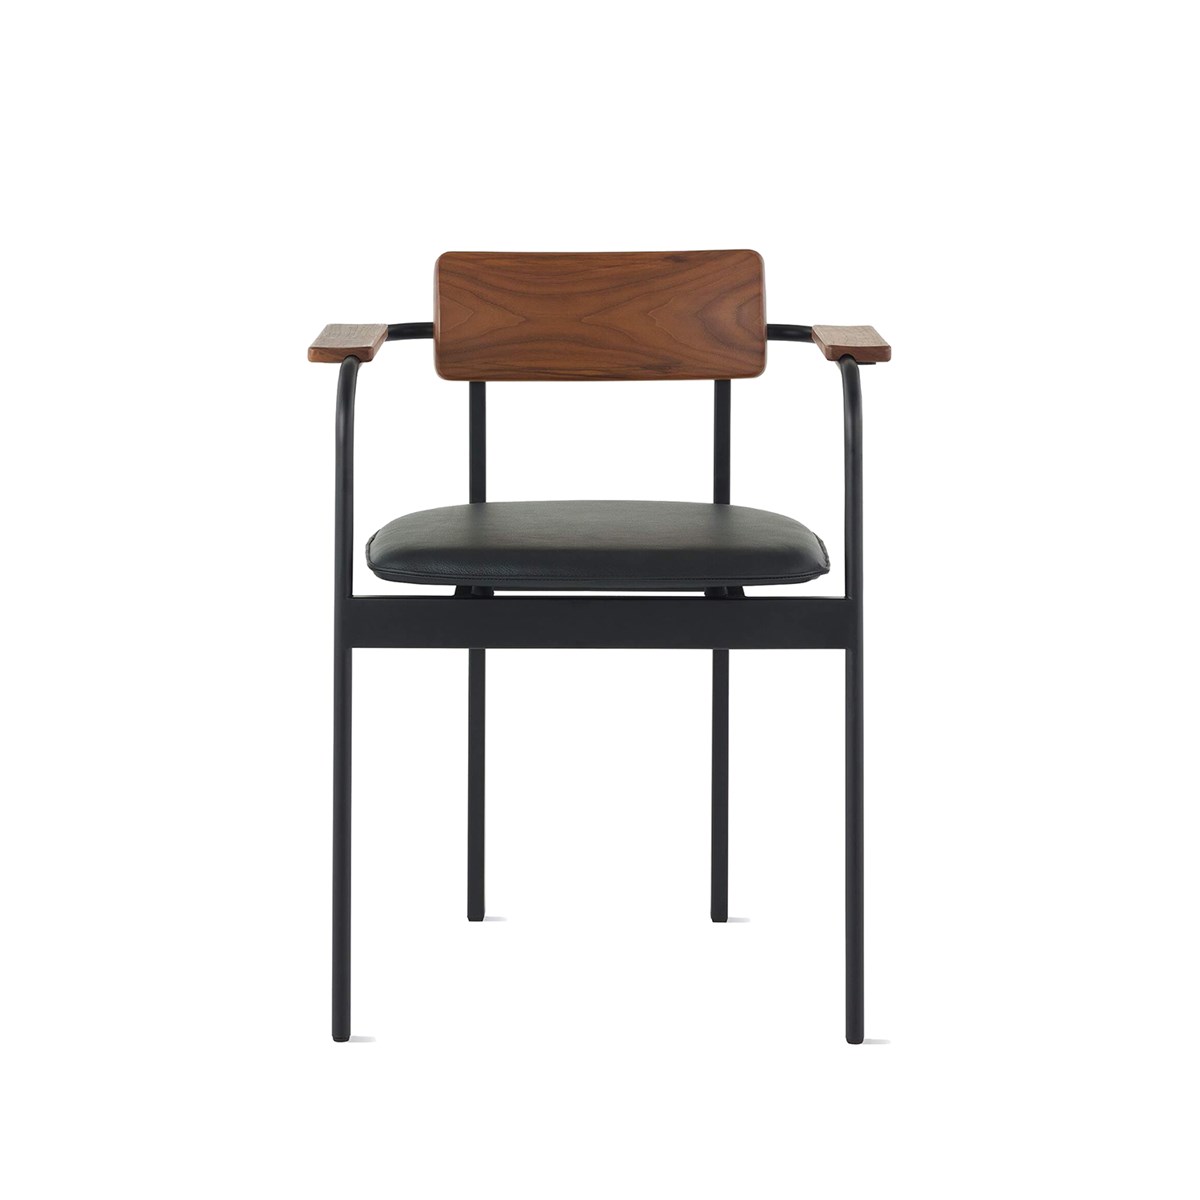 Ig Prd Ovw Betwixt Chairs 02